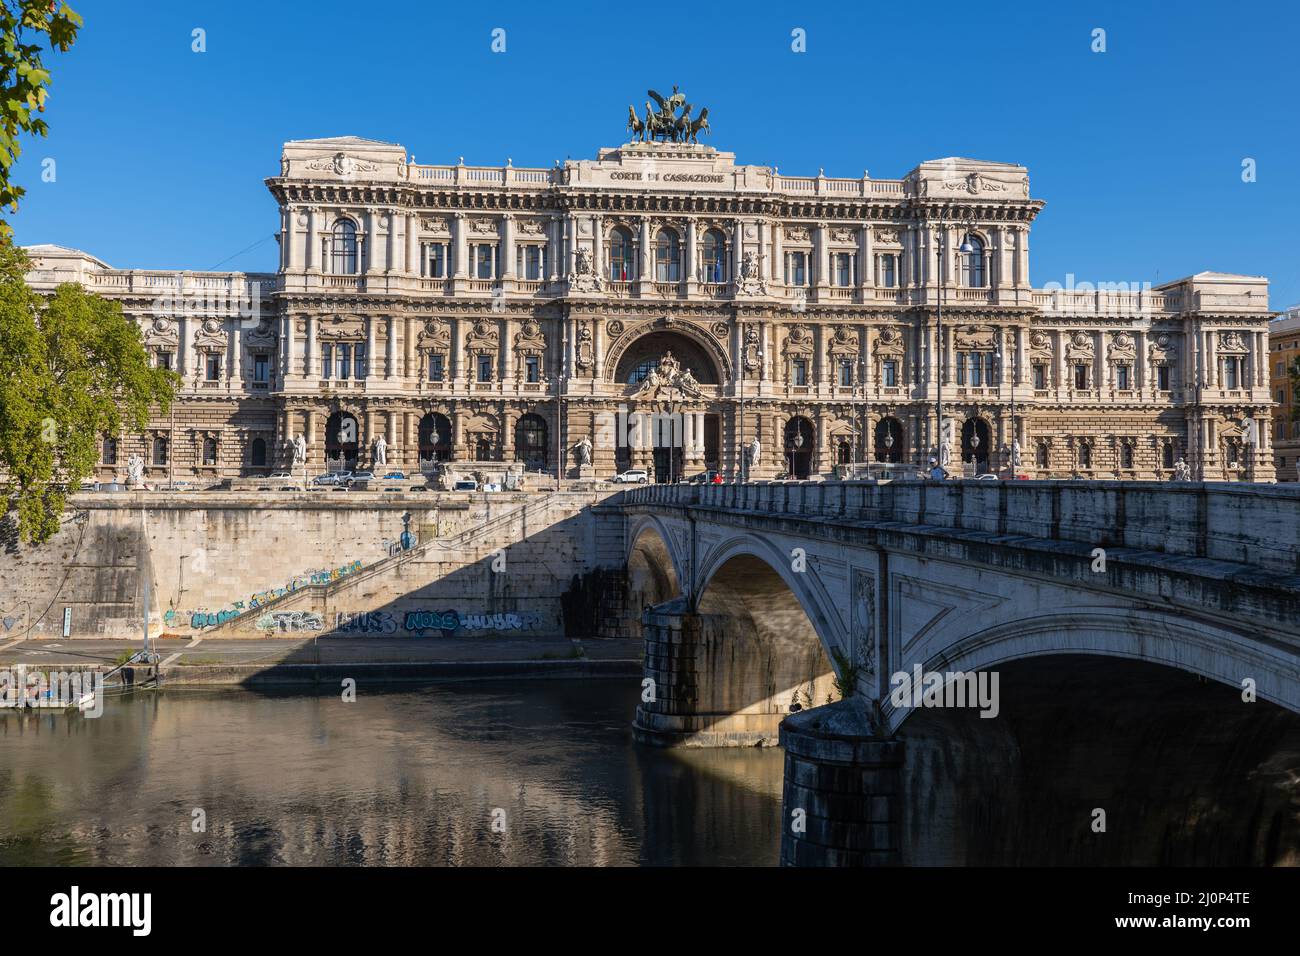 Corte di Cassazione in Rome, Italy, The Palace of Justice, seat of the Supreme Court of Cassation and the Judicial Public Library. Ponte Umberto I on Stock Photo